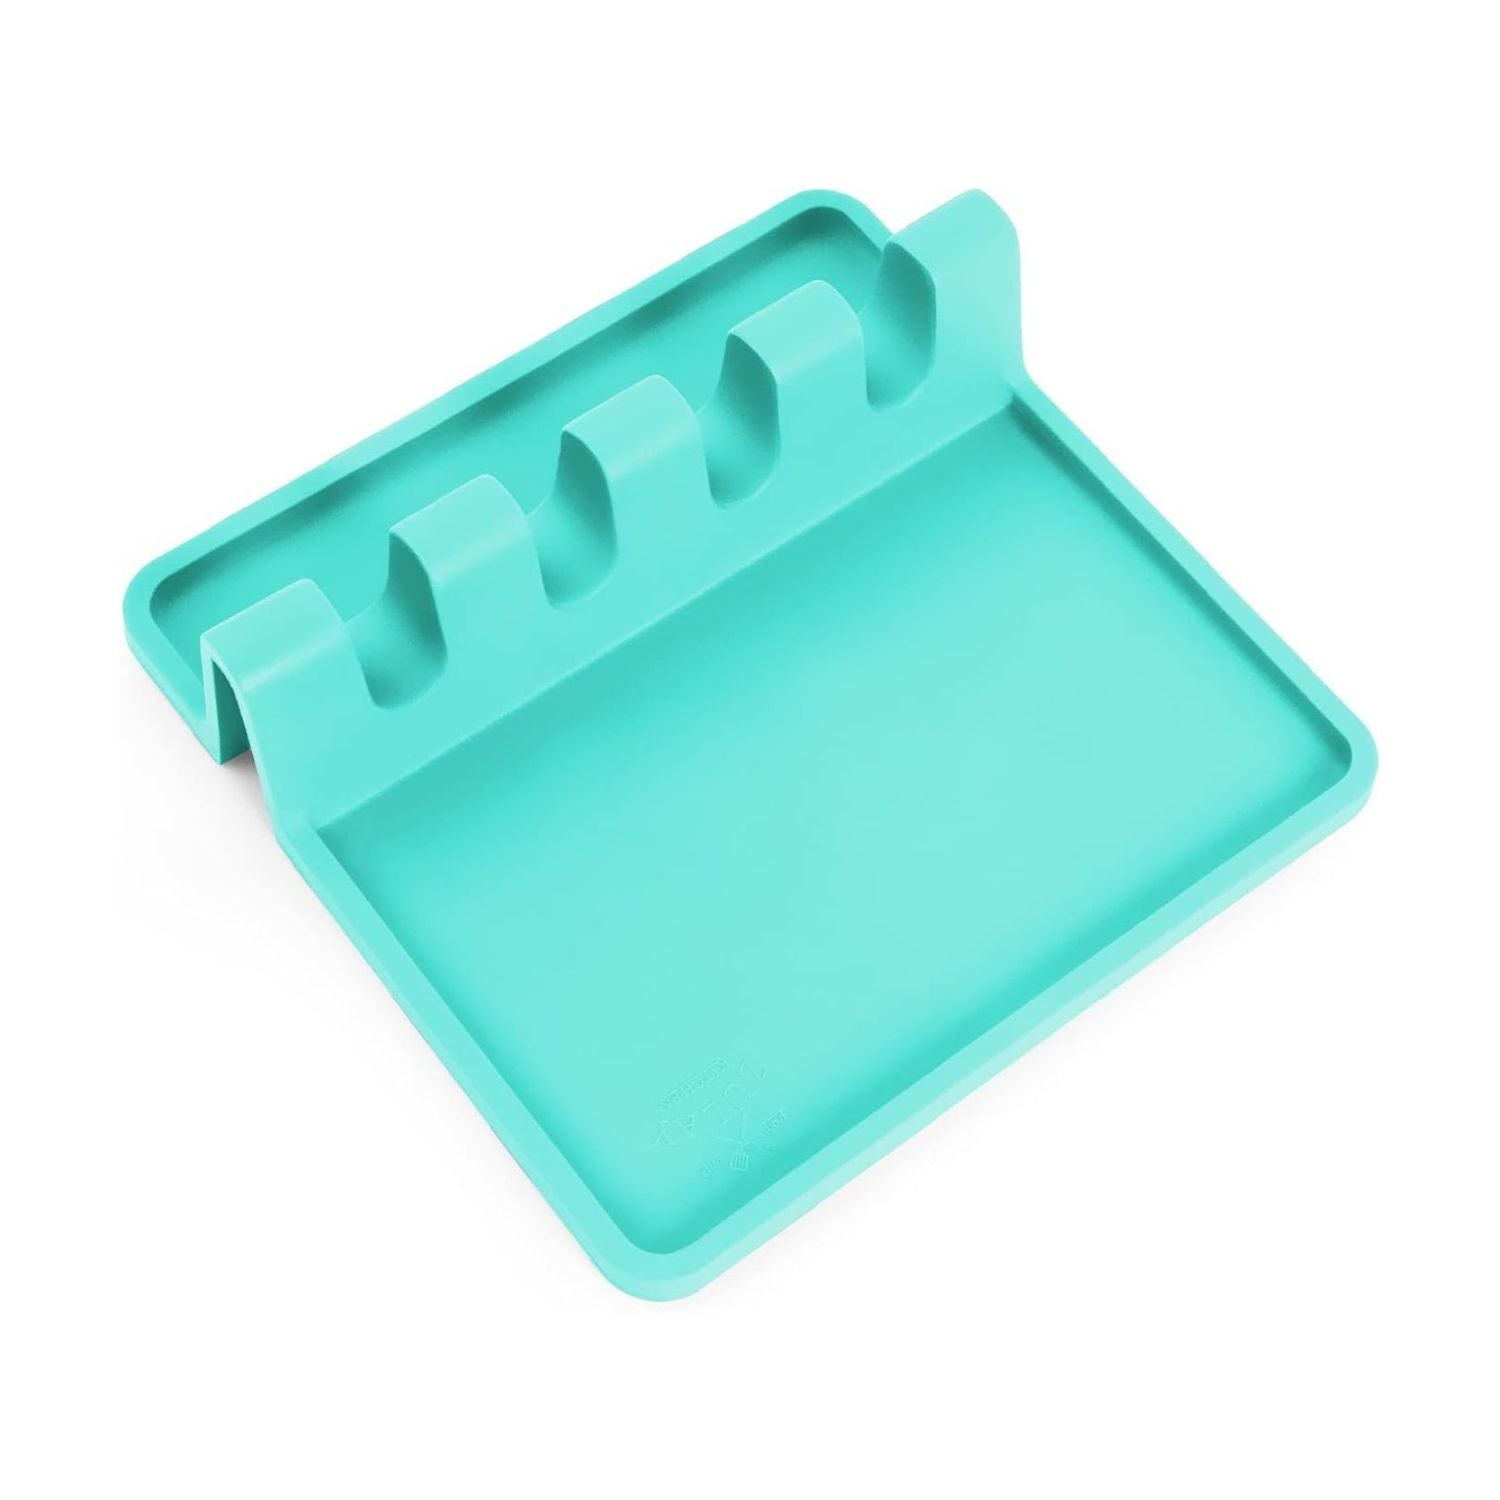 Zulay Kitchen Silicone Multipurpose Tray Holder - Gray, 1 - Kroger